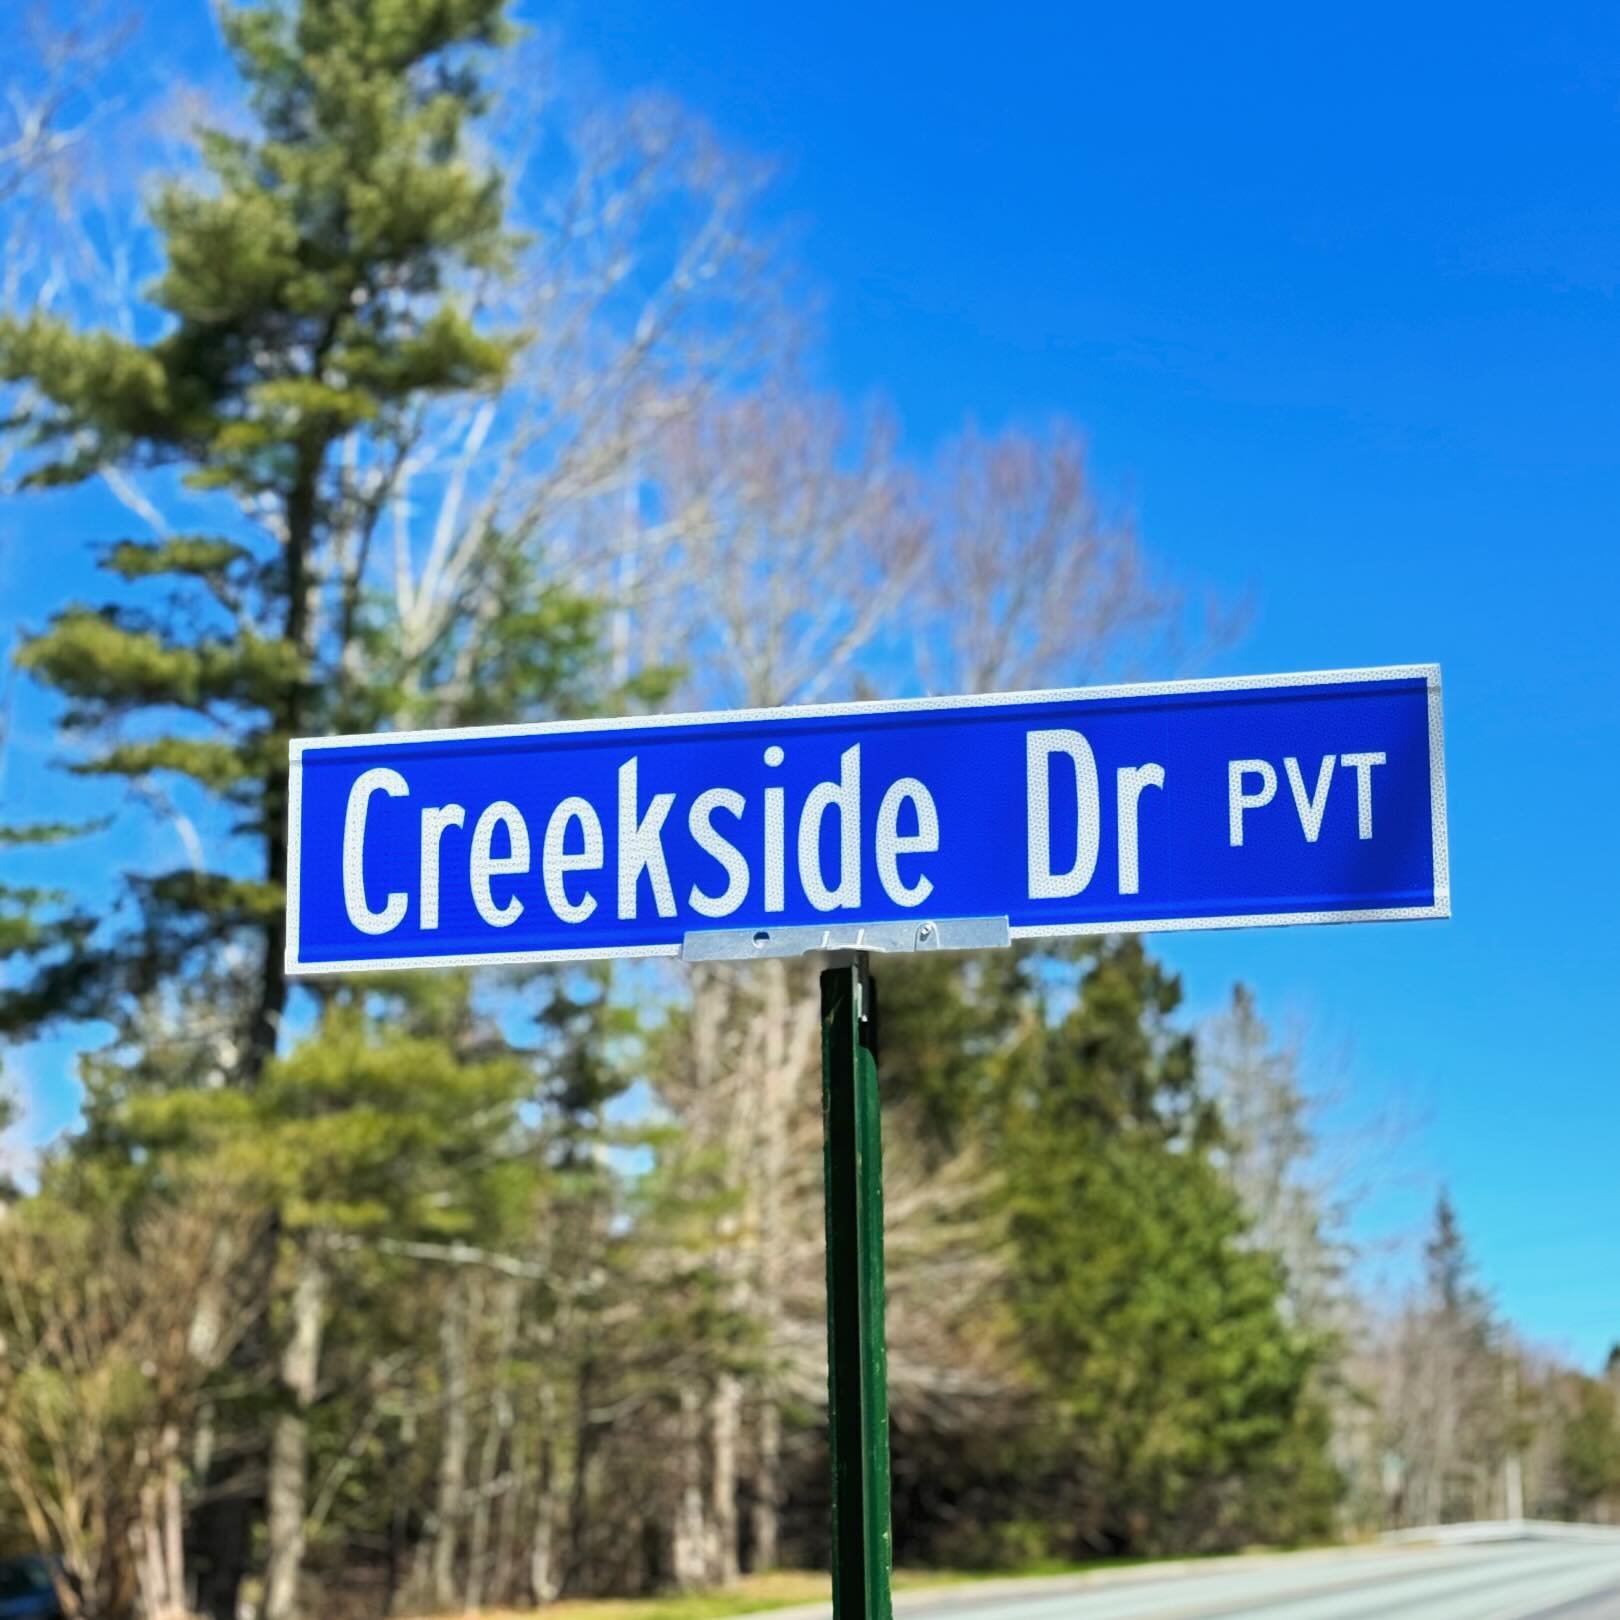 It&rsquo;s official! You can find our yurts located at Creekside Drive, Bar Harbor, Maine! 

 #maineroad #northeastcreek #yurtbuilding 
#barharbor #acadianationalpark #adventuretravel